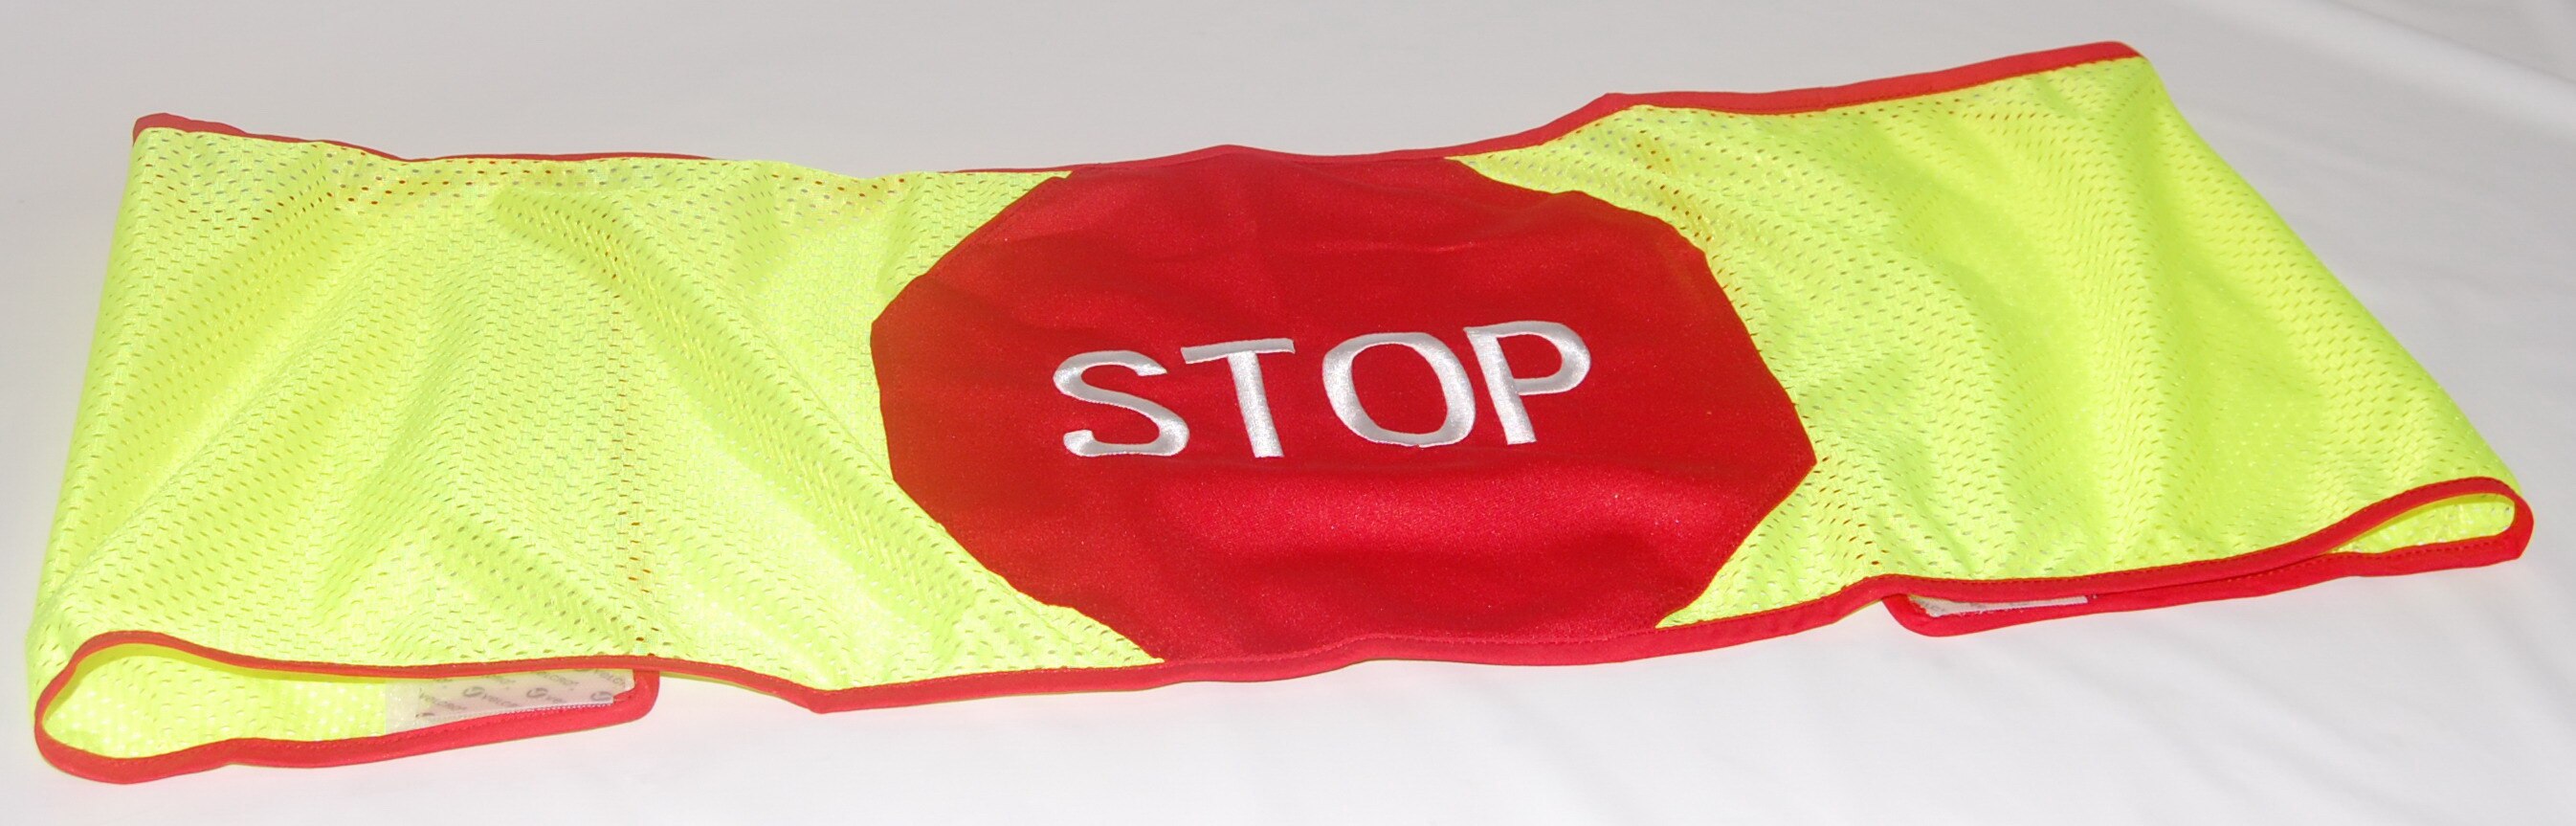 Skil-Care Stop Strip with Stop Sign